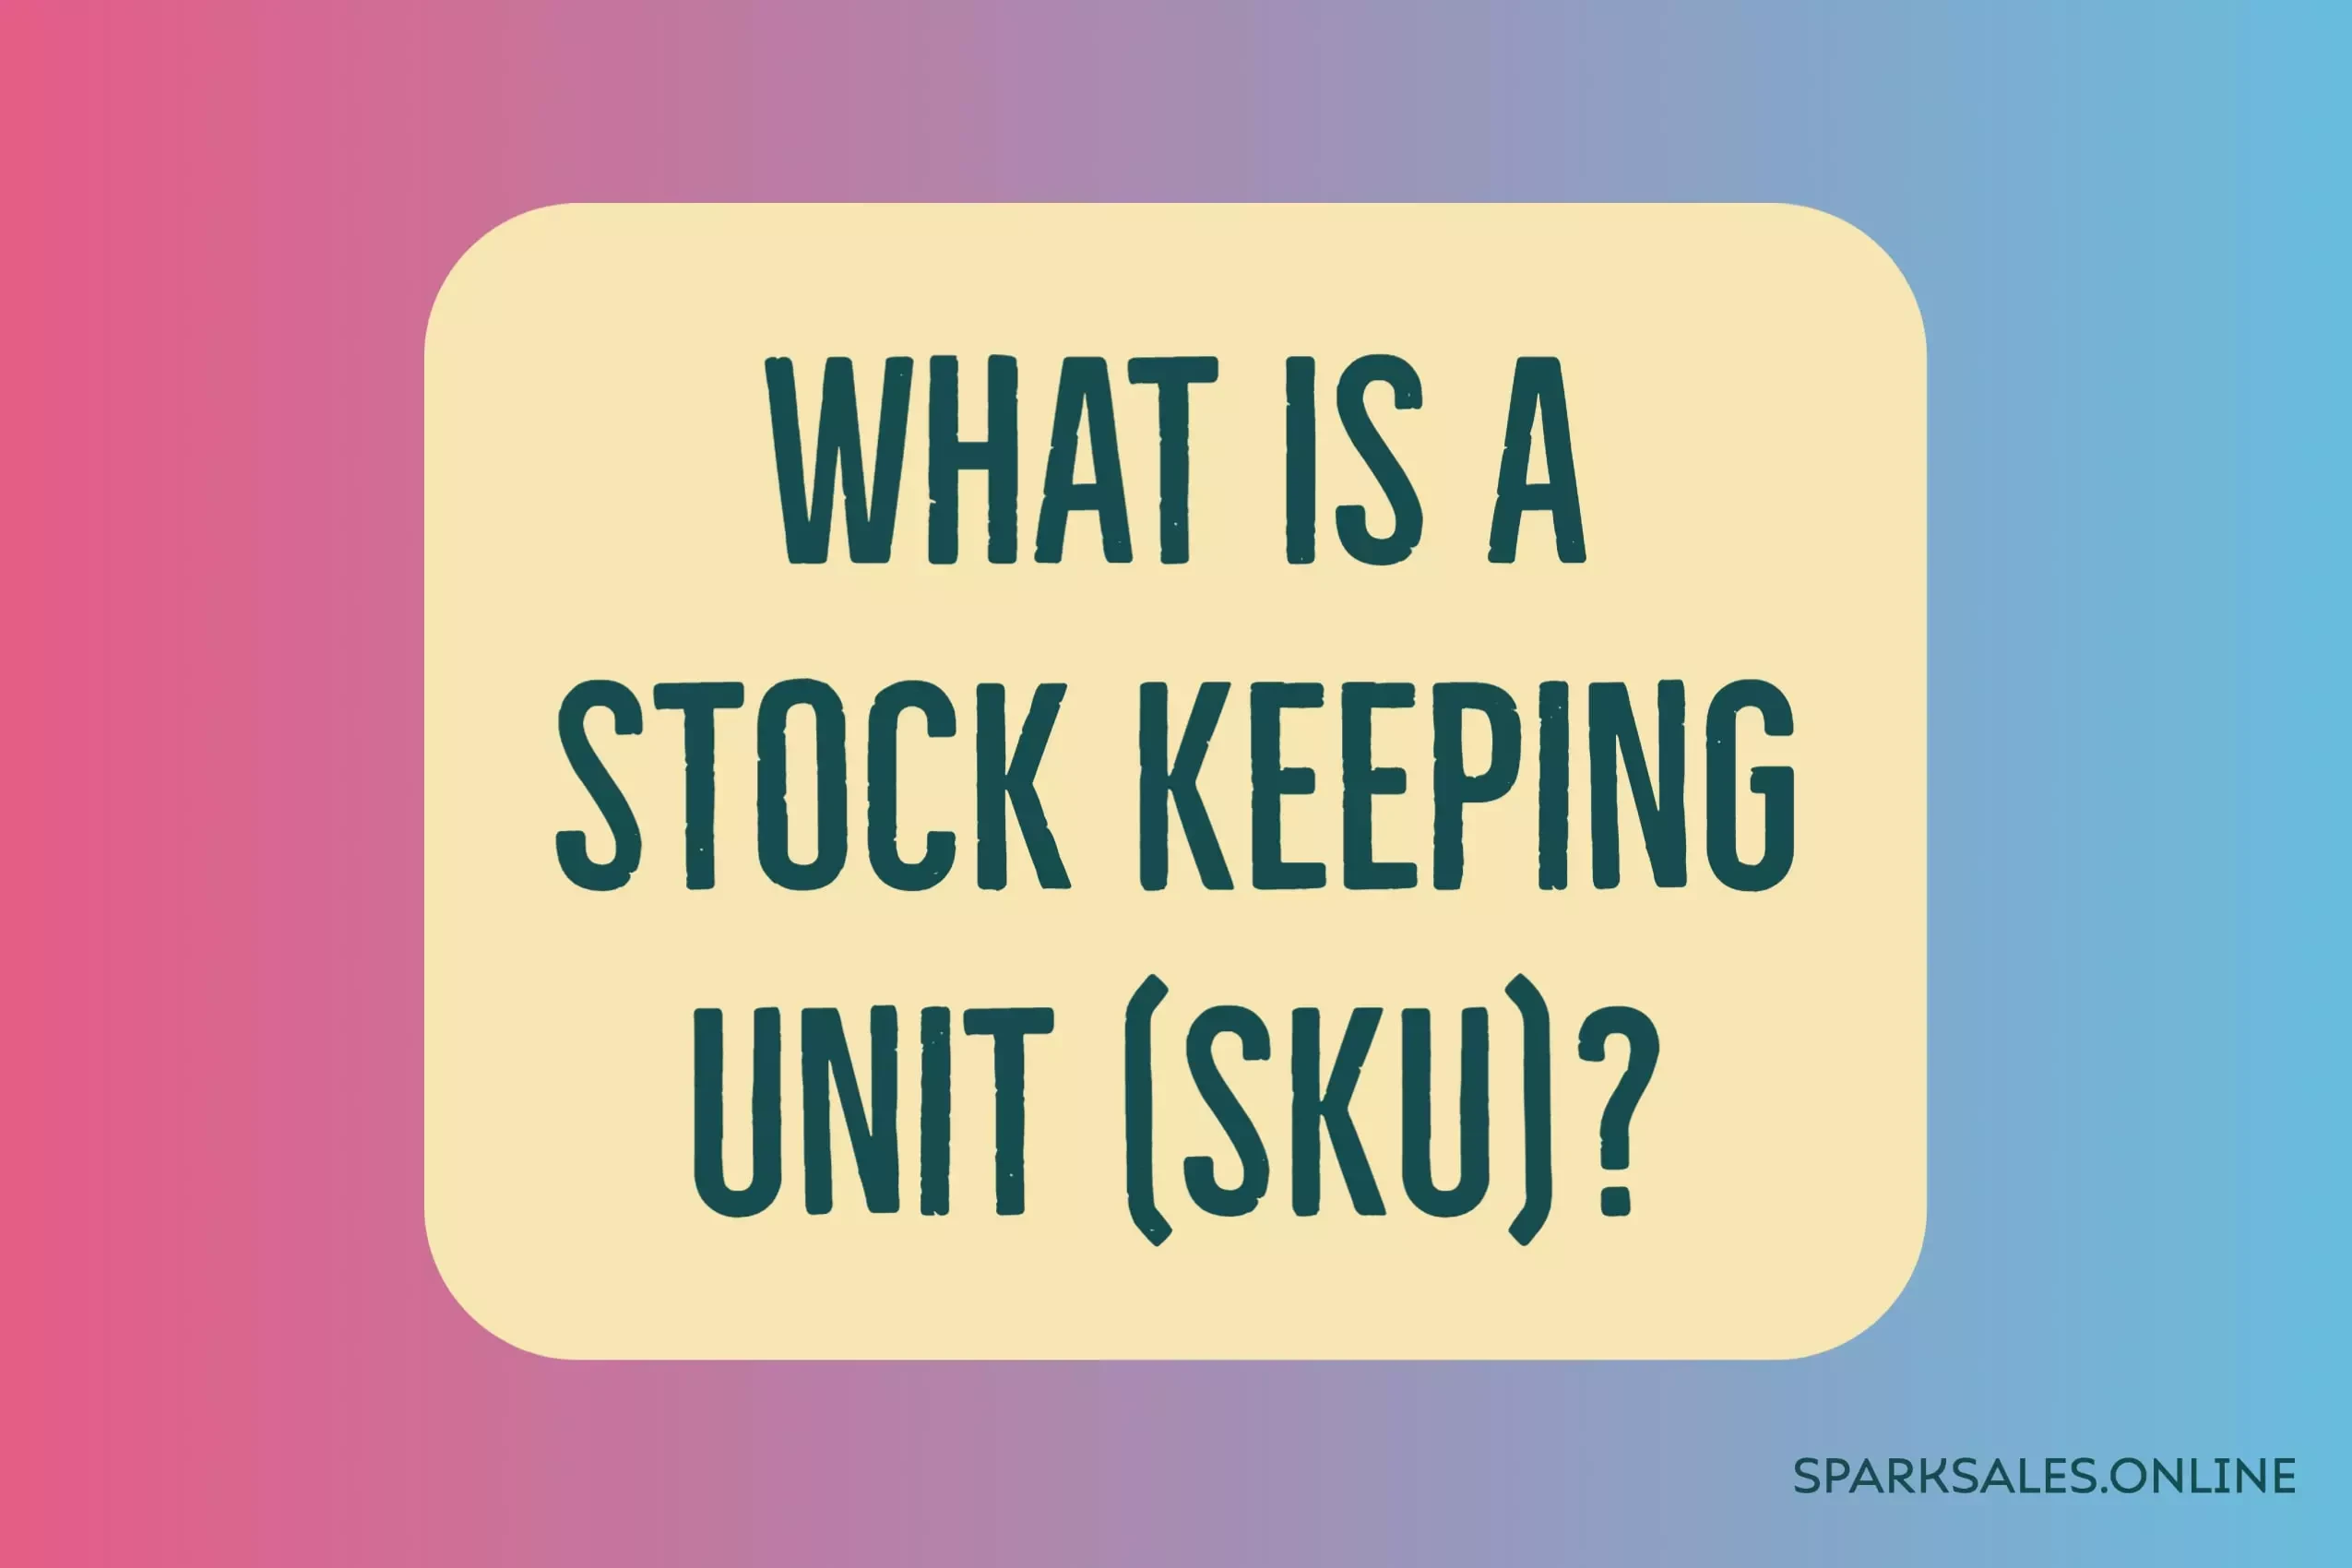 What Is a Stock Keeping Unit (SKU)?